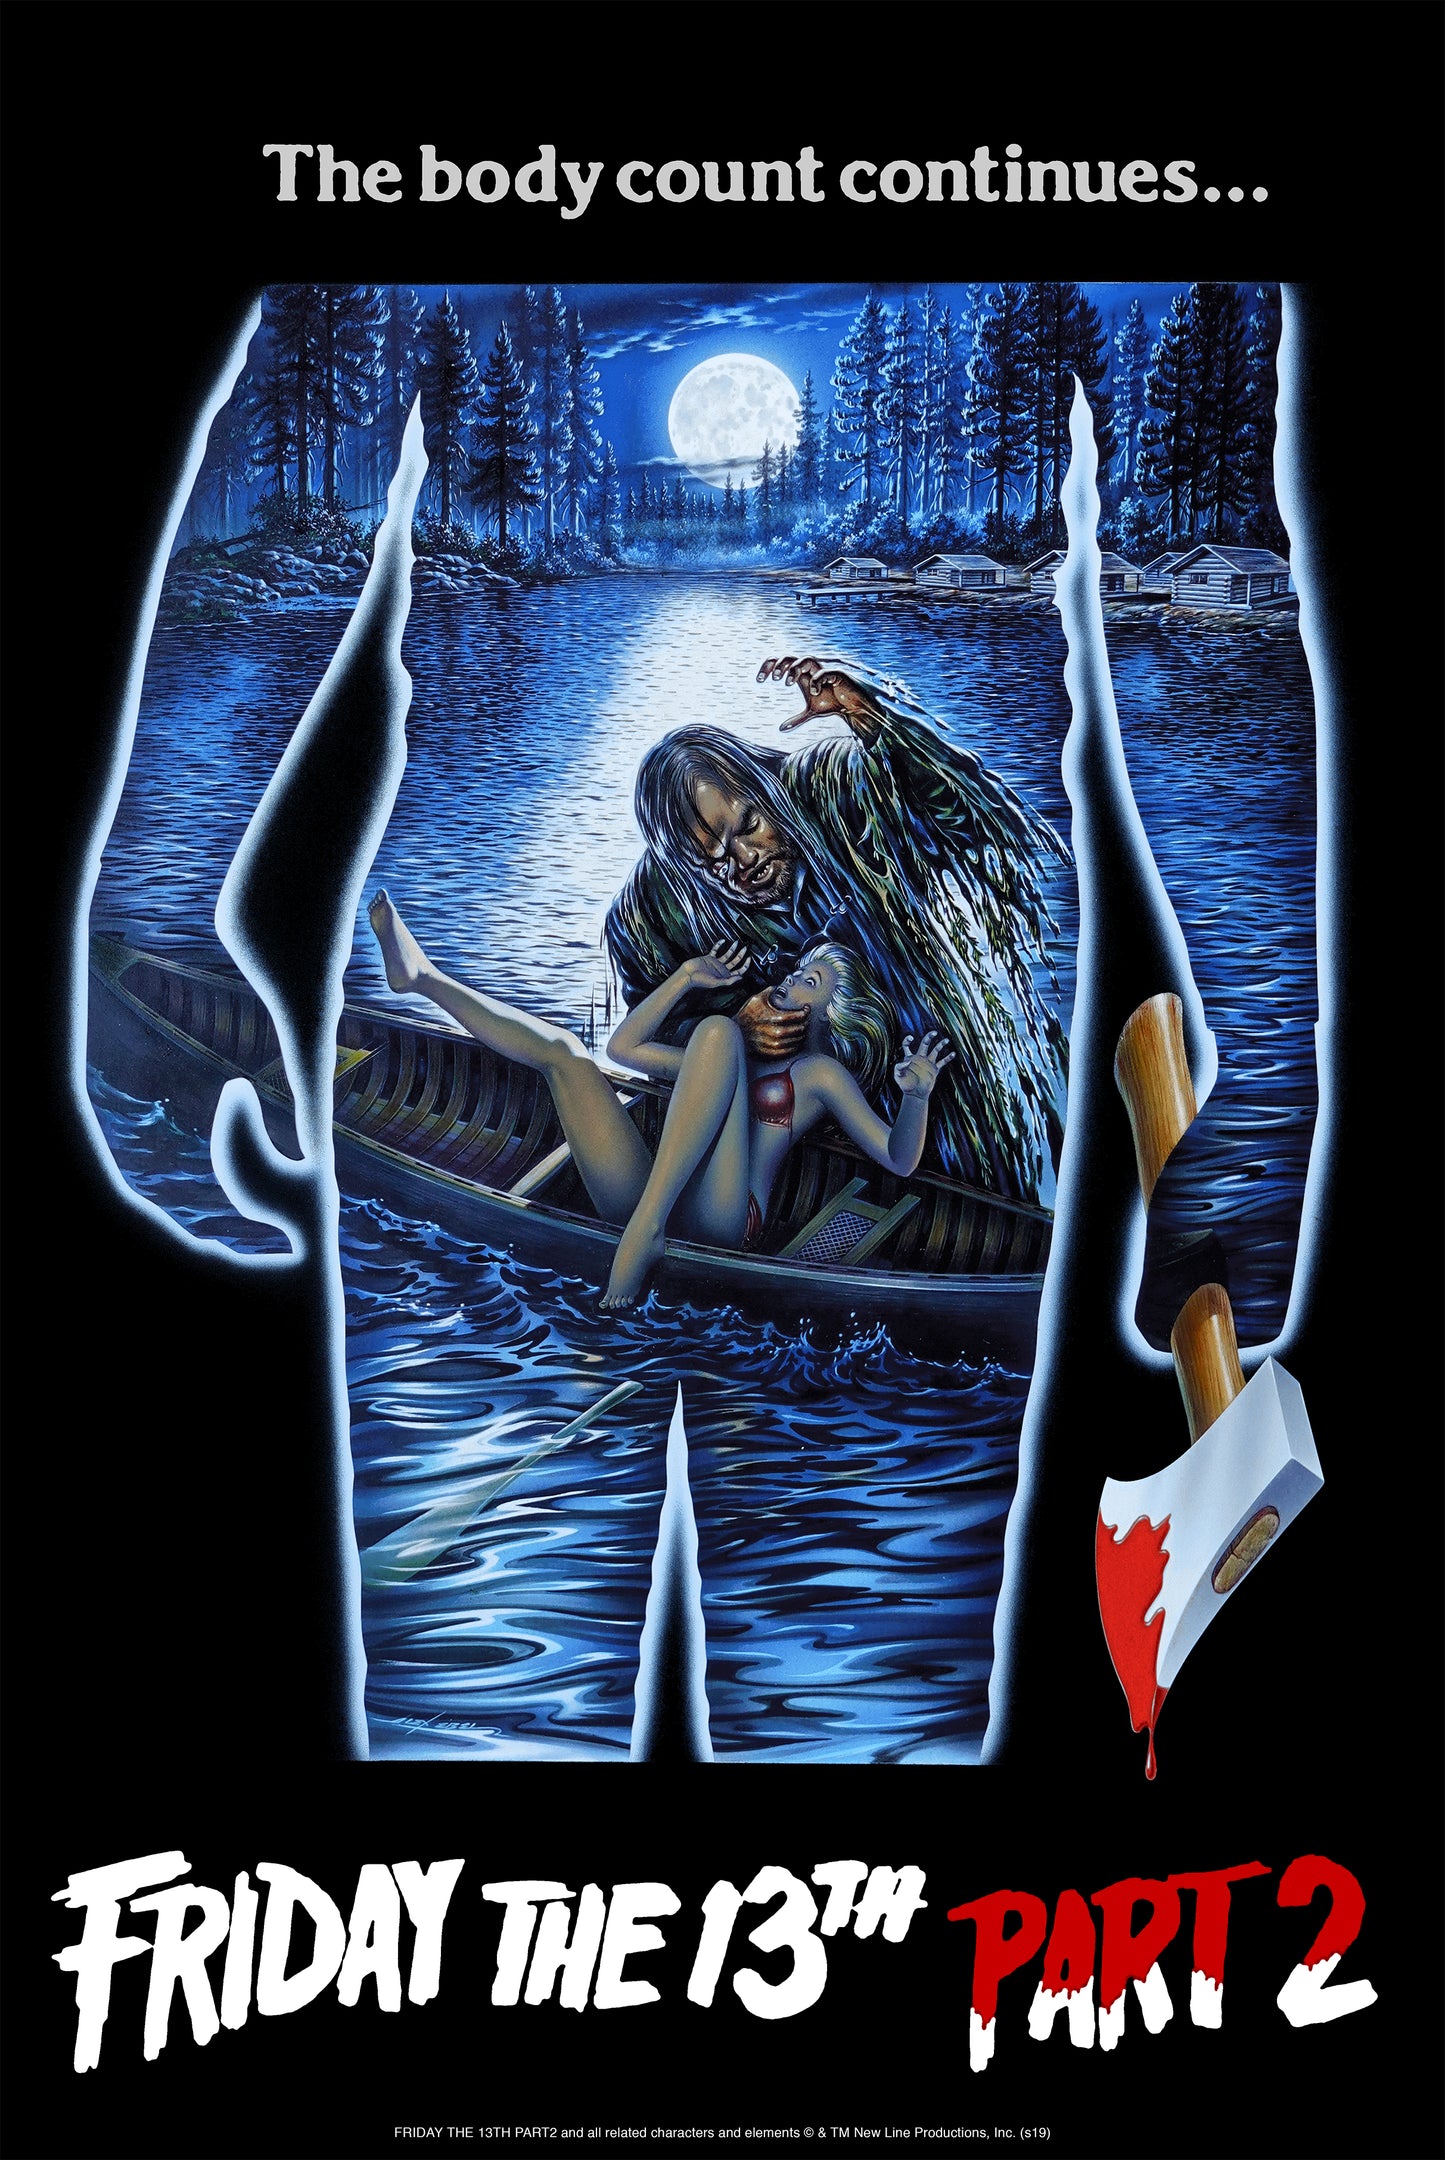 Spiros Angelikas "Friday the 13th Part 2" Glow-in-the-Dark Variant